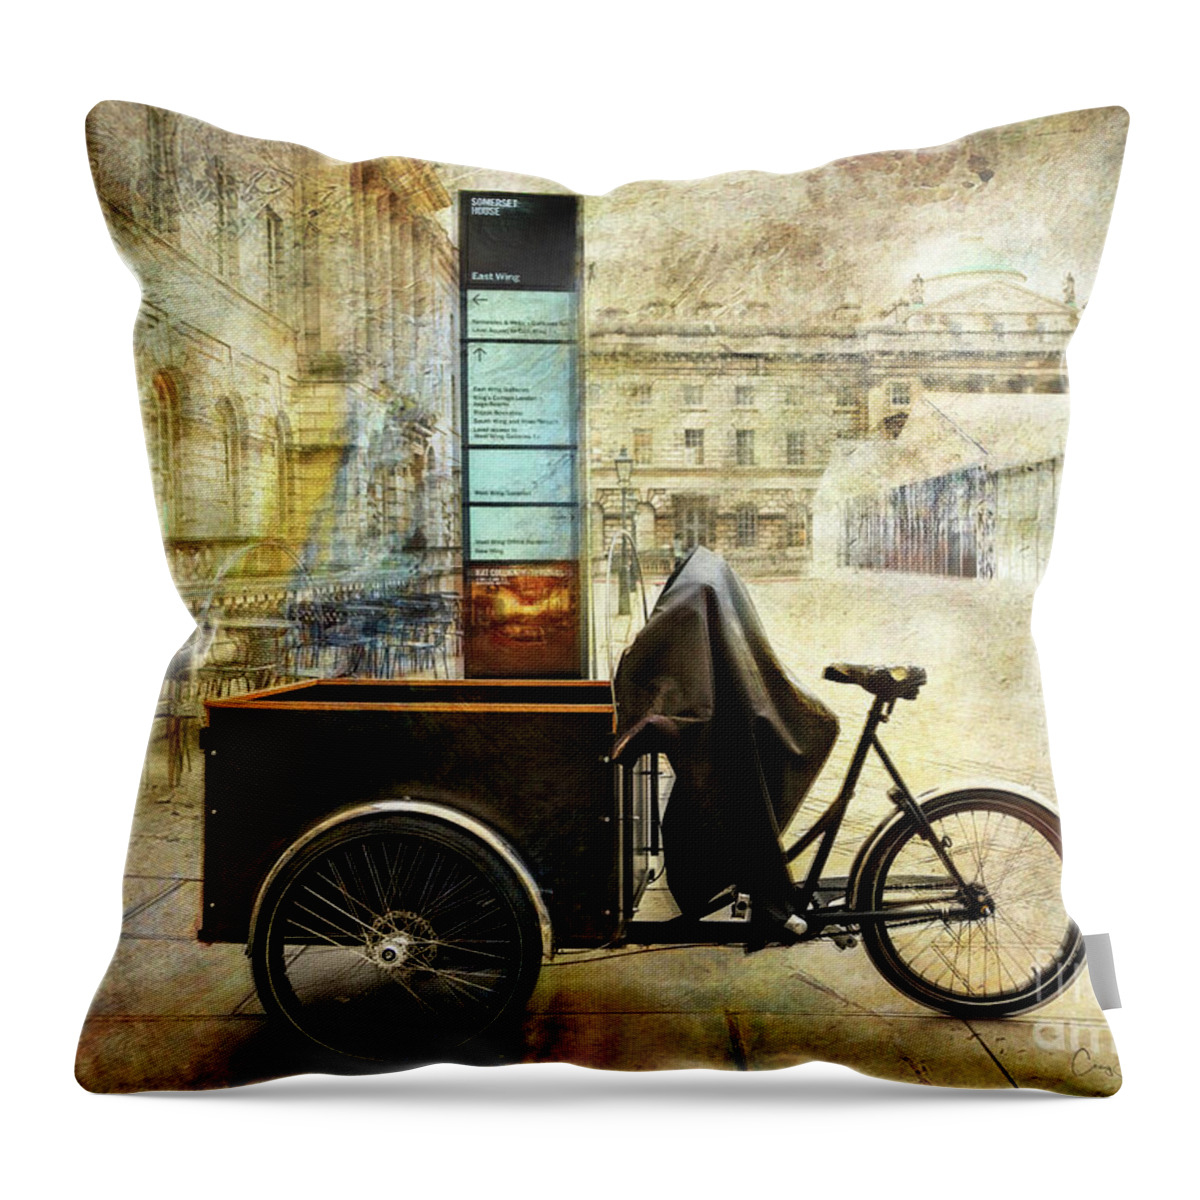 Bicycle Throw Pillow featuring the photograph Somerset House Cart Bicycle by Craig J Satterlee